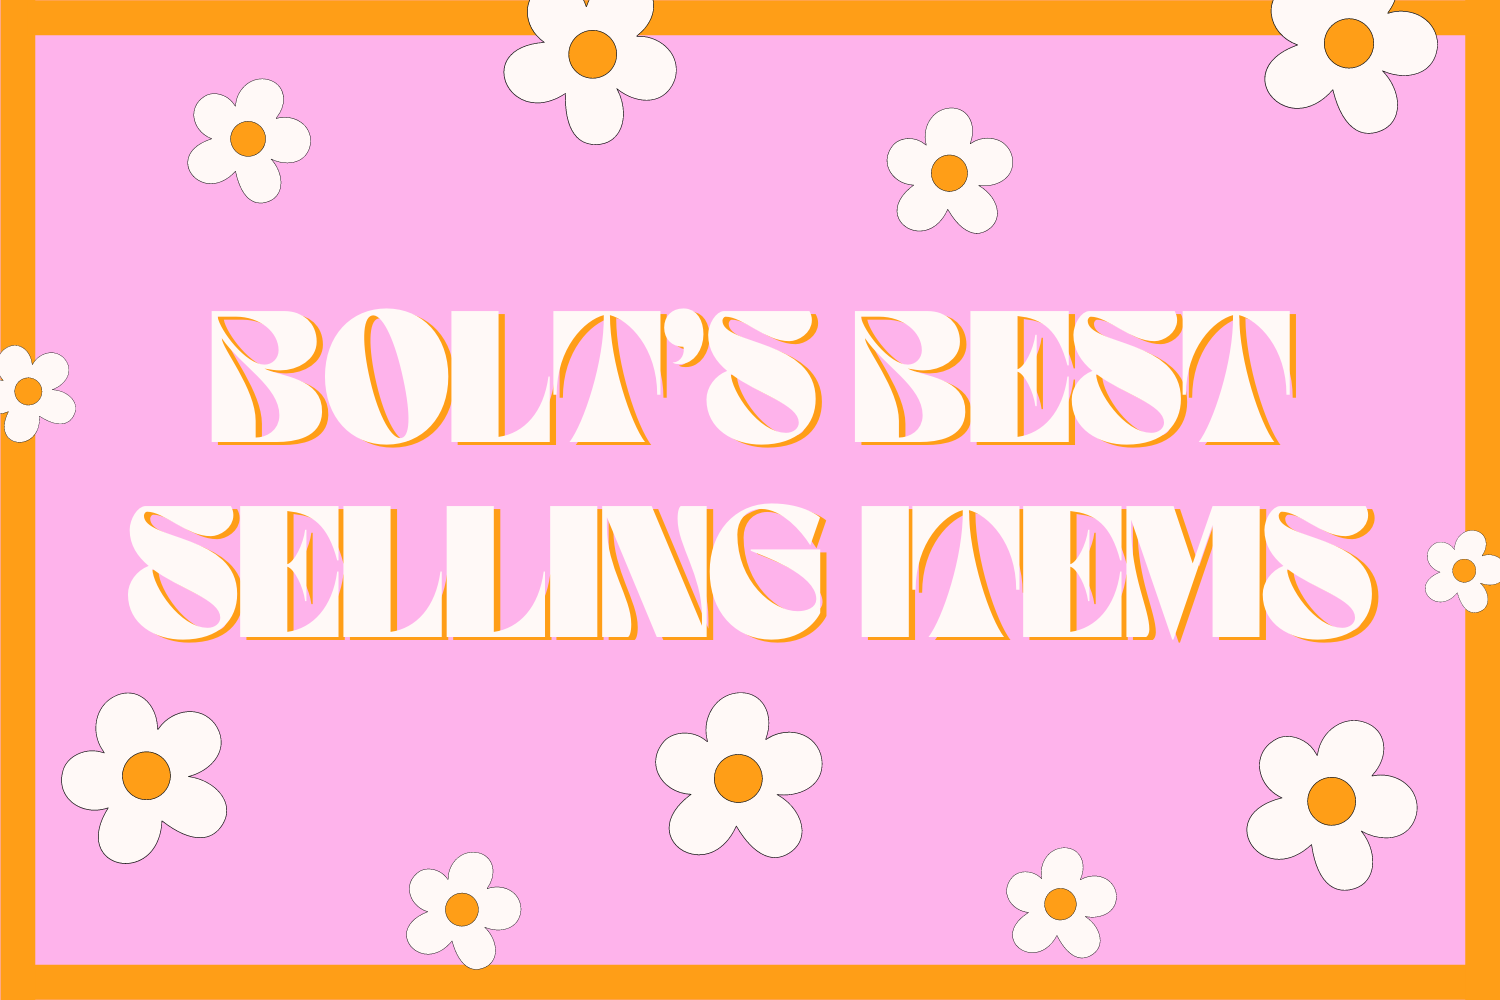 Bolt's Best Selling Items!